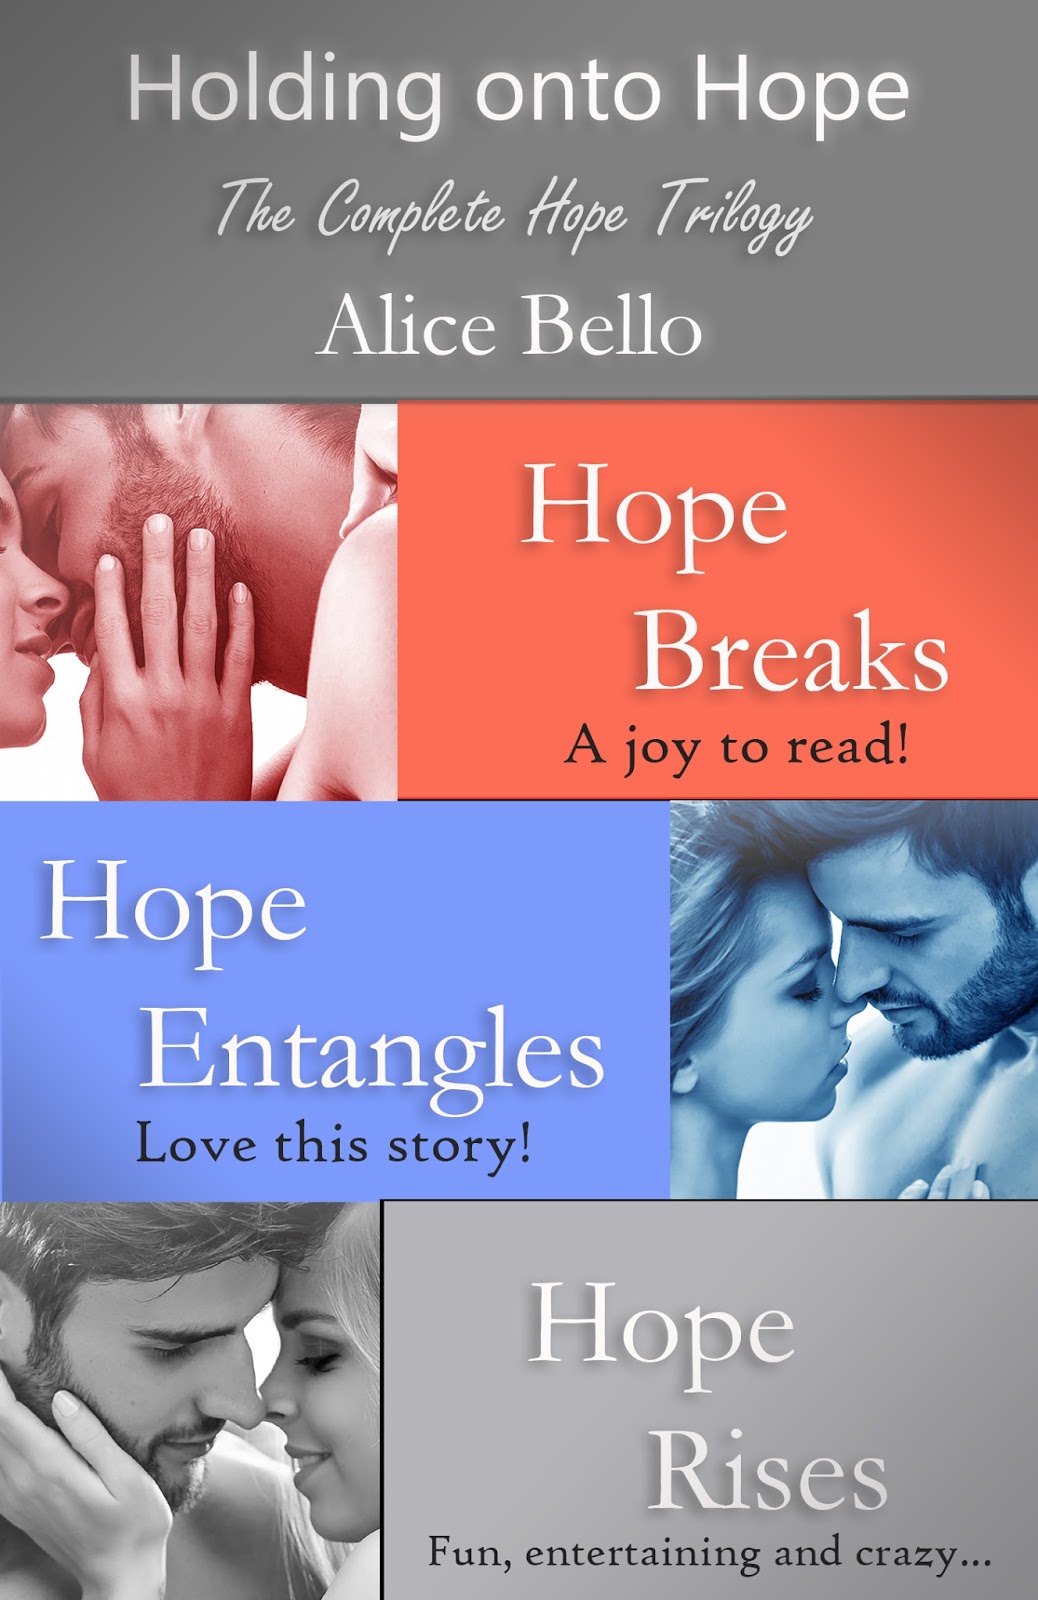 Alice Bello Romance: New Cover for Holding onto Hope: The Complete Hope